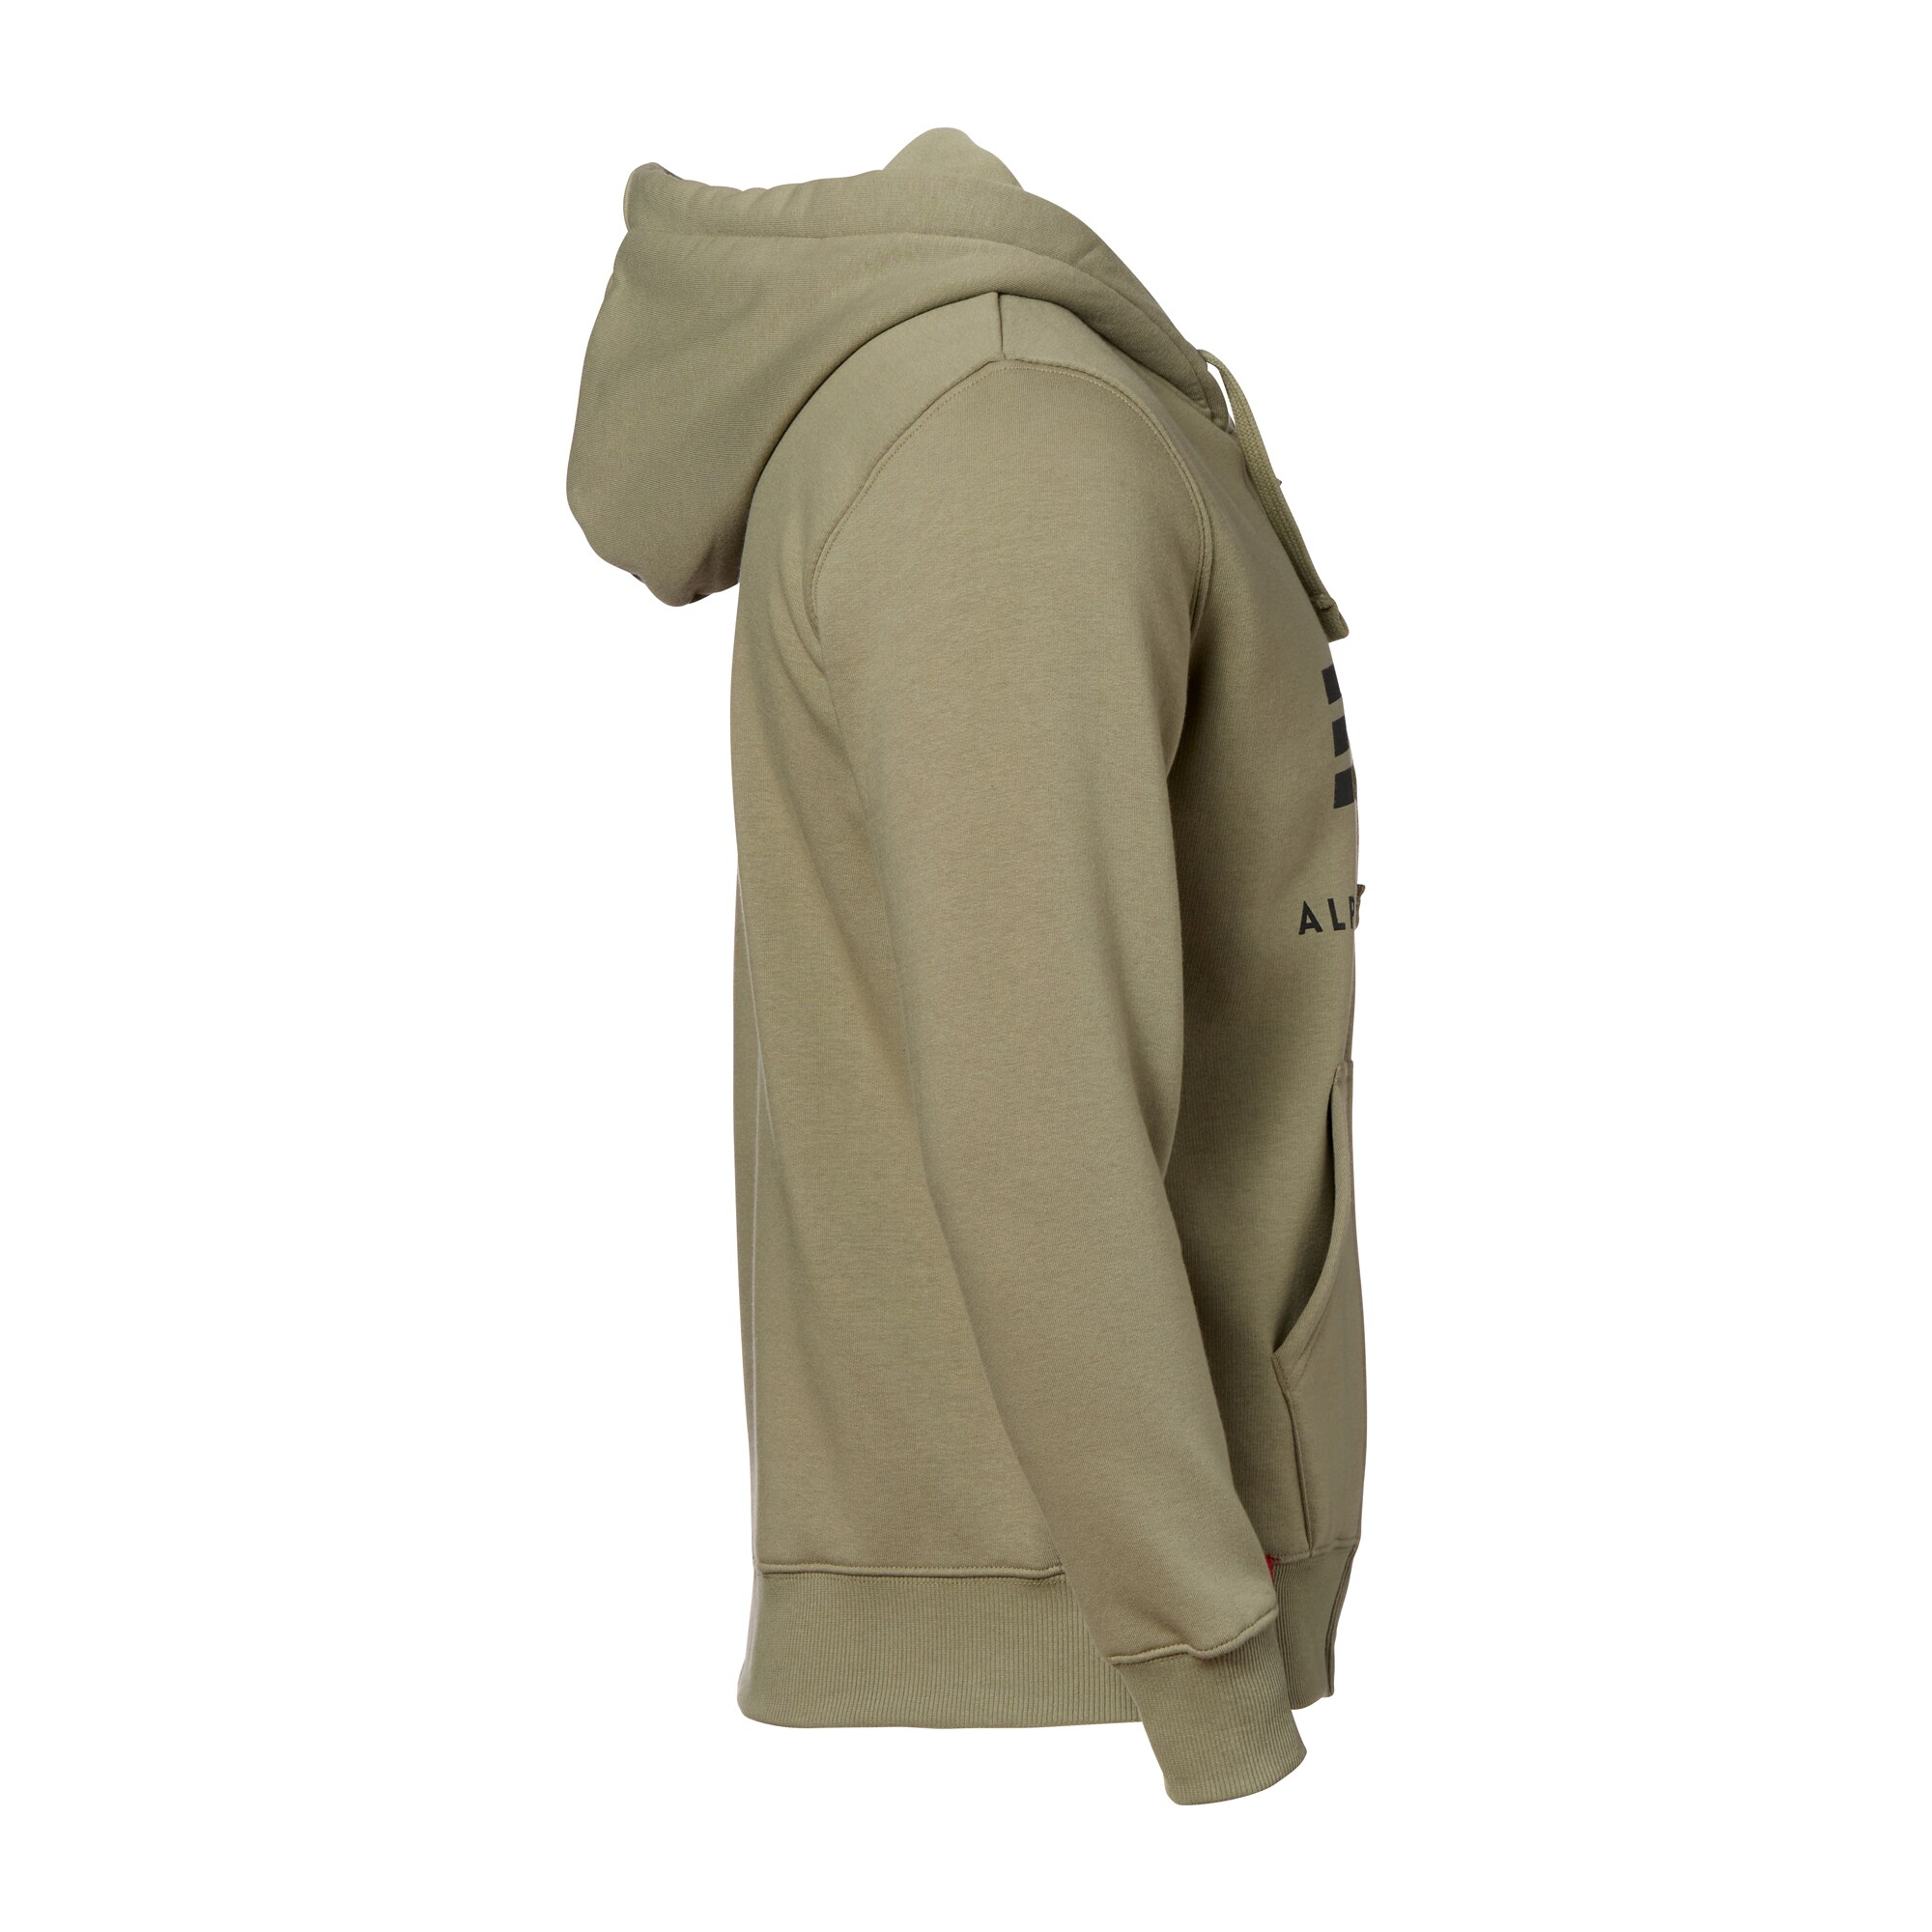 Purchase the Alpha olive Hoodie Basic ASMC Industries by Zip